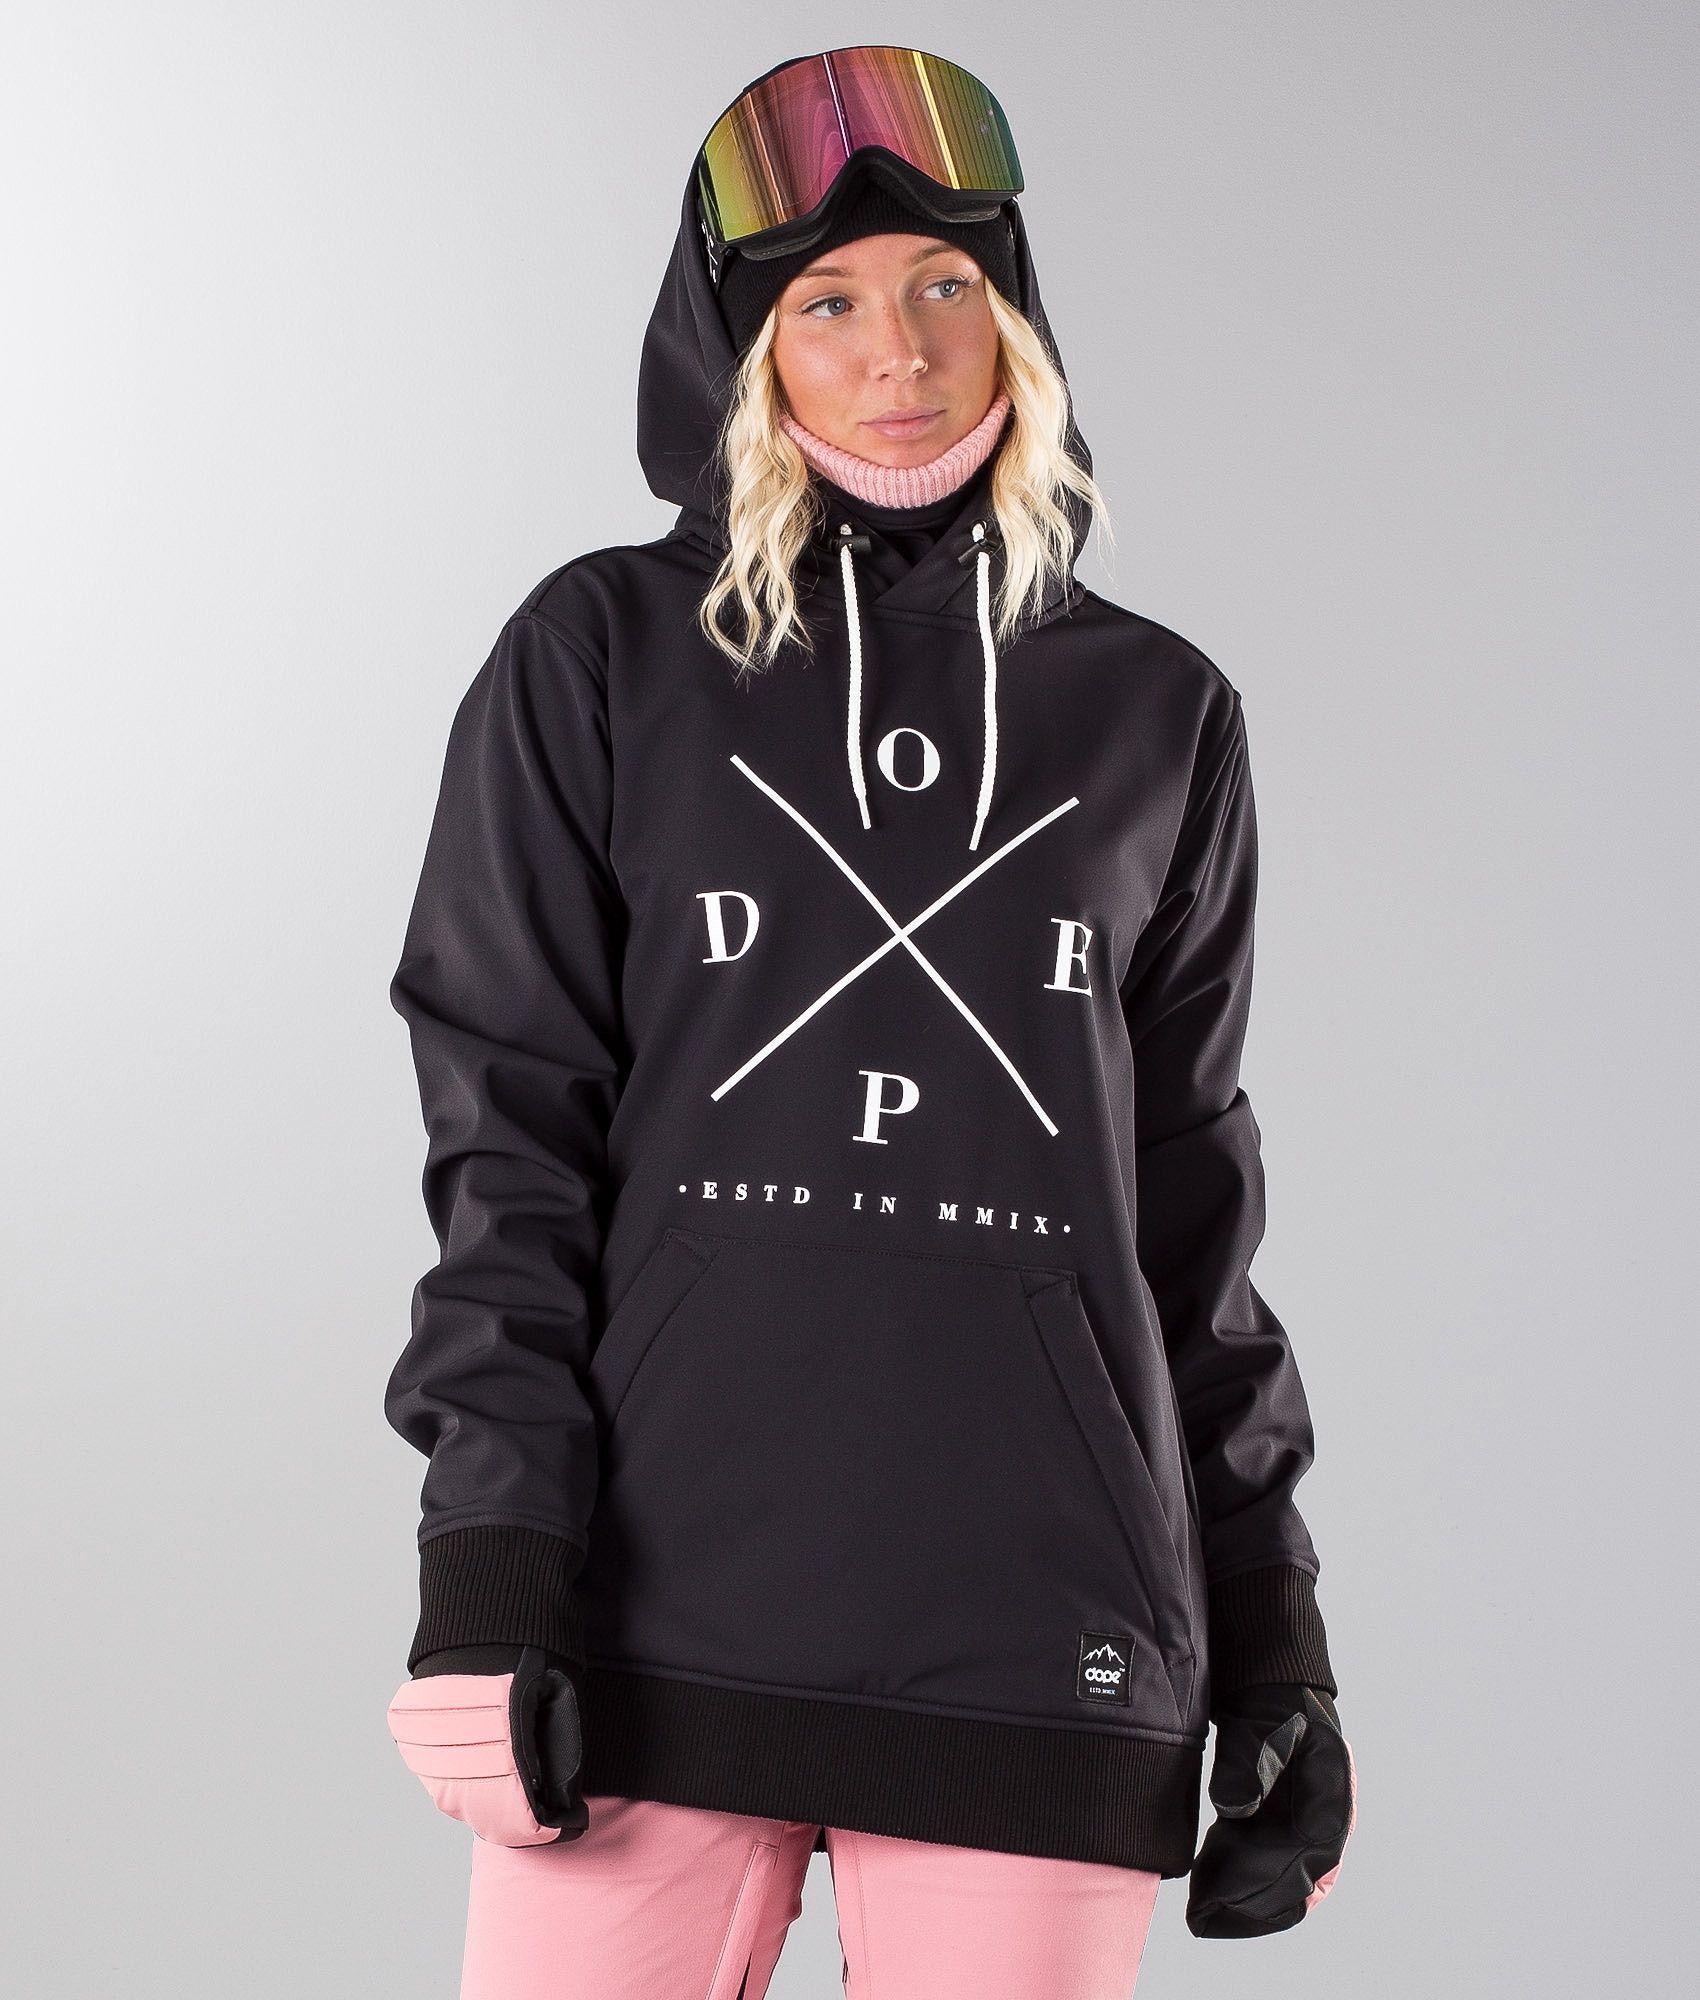 An Overview Of Snowboard Jackets